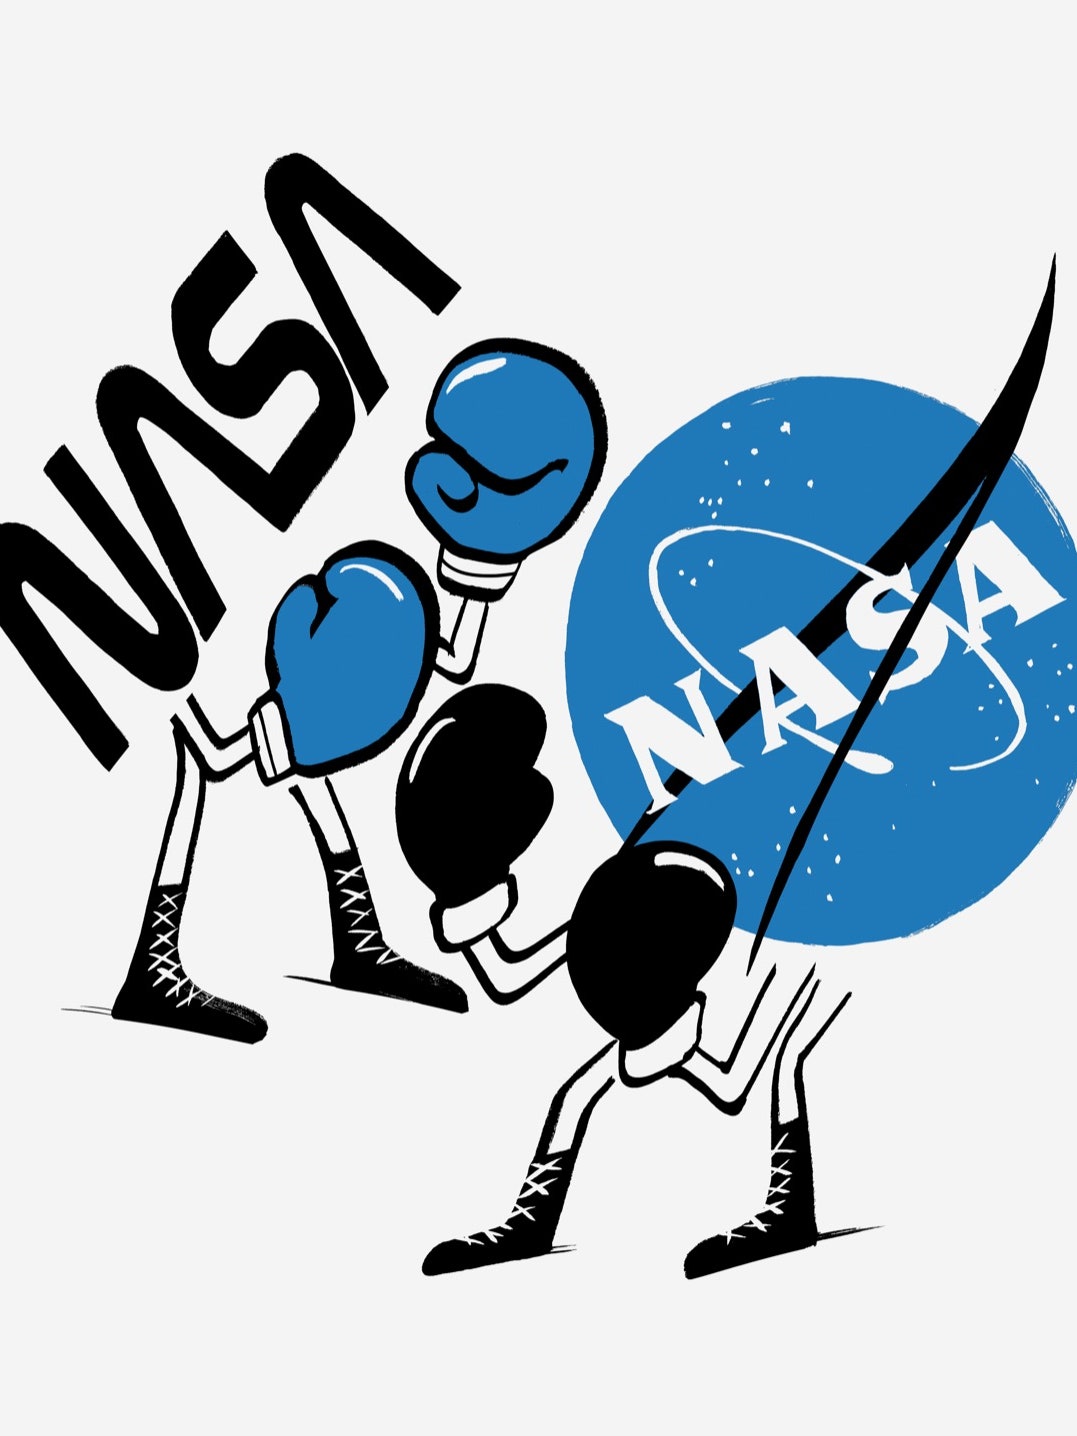 Nasa logos with arms and legs boxing each other.